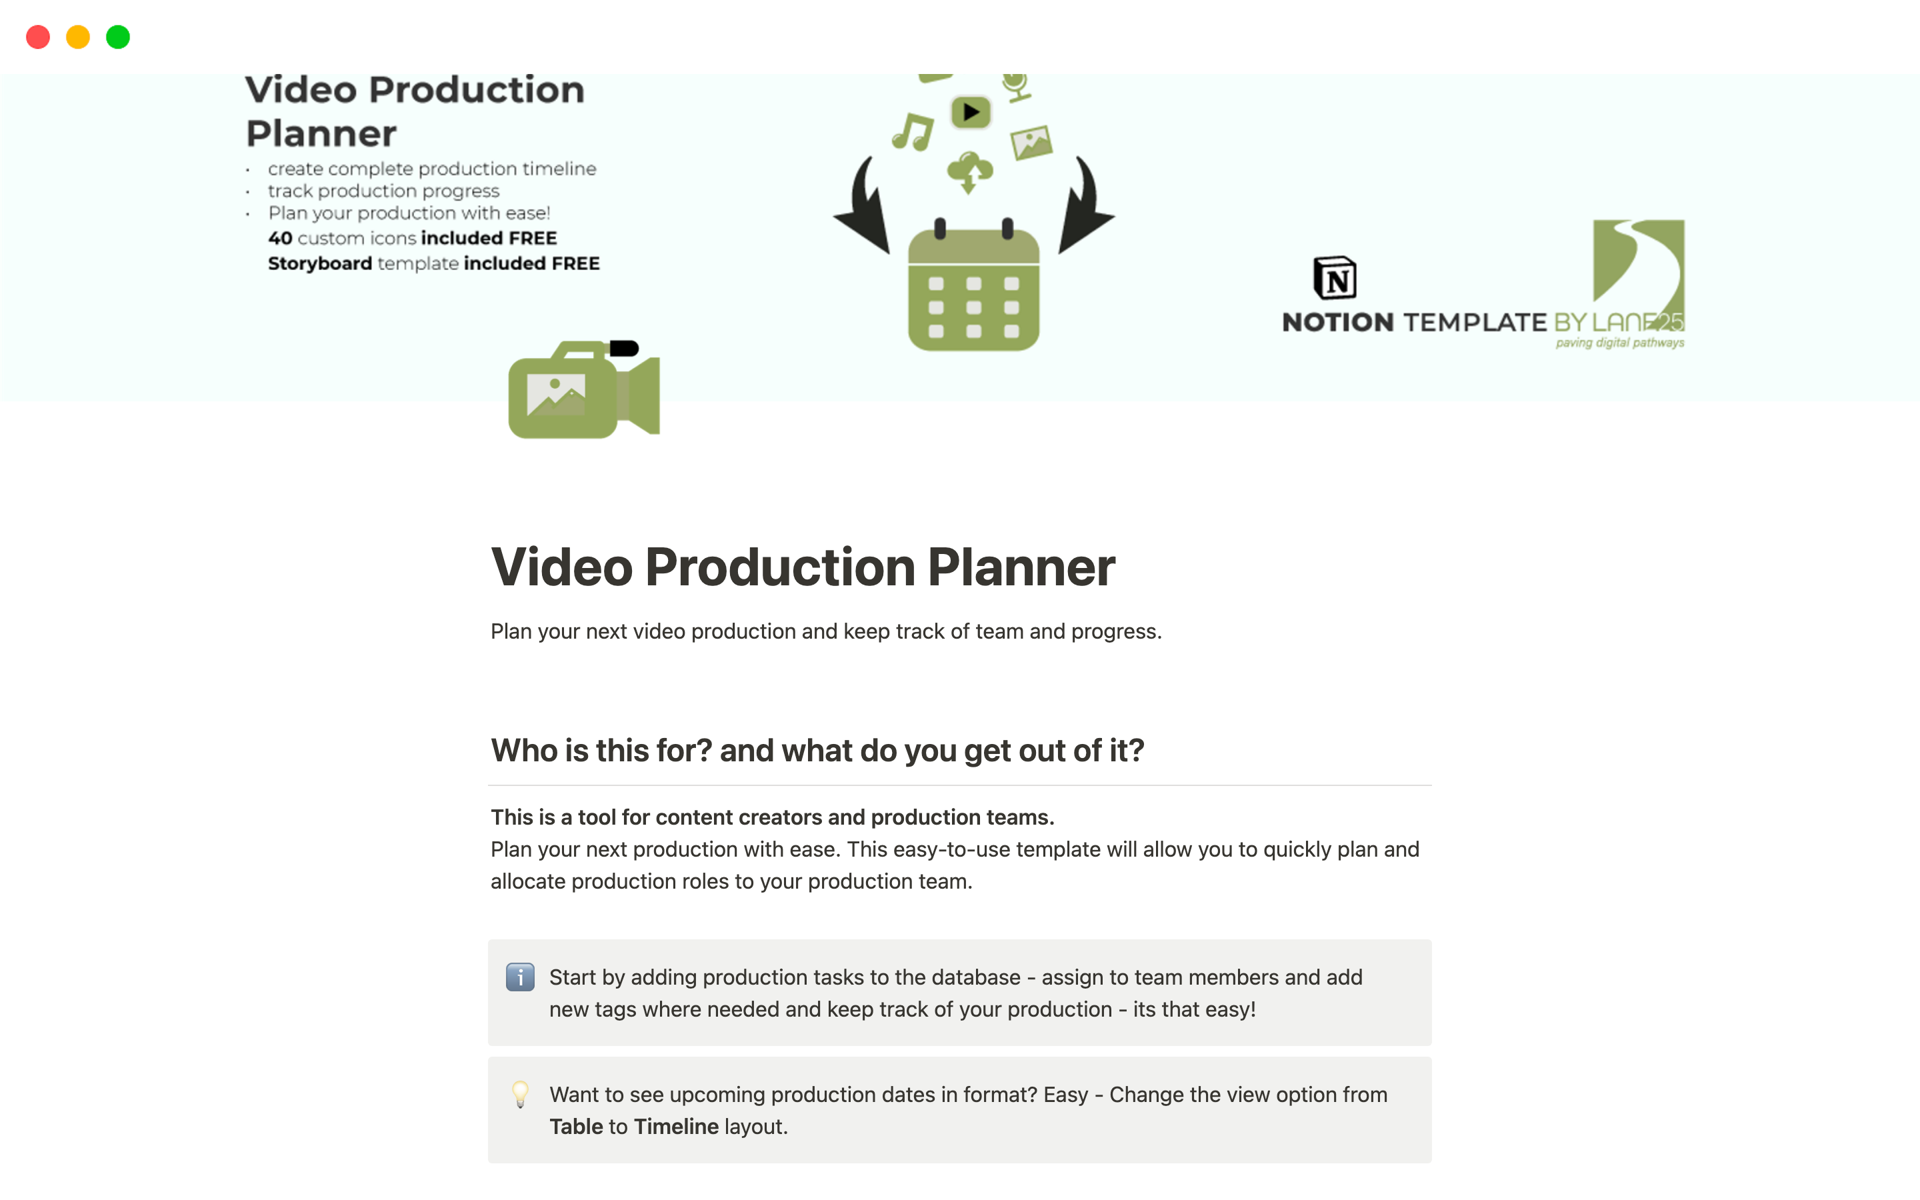 This is a tool for content creators and production teams to create complete production timeline, track production progress and plan your production with ease!